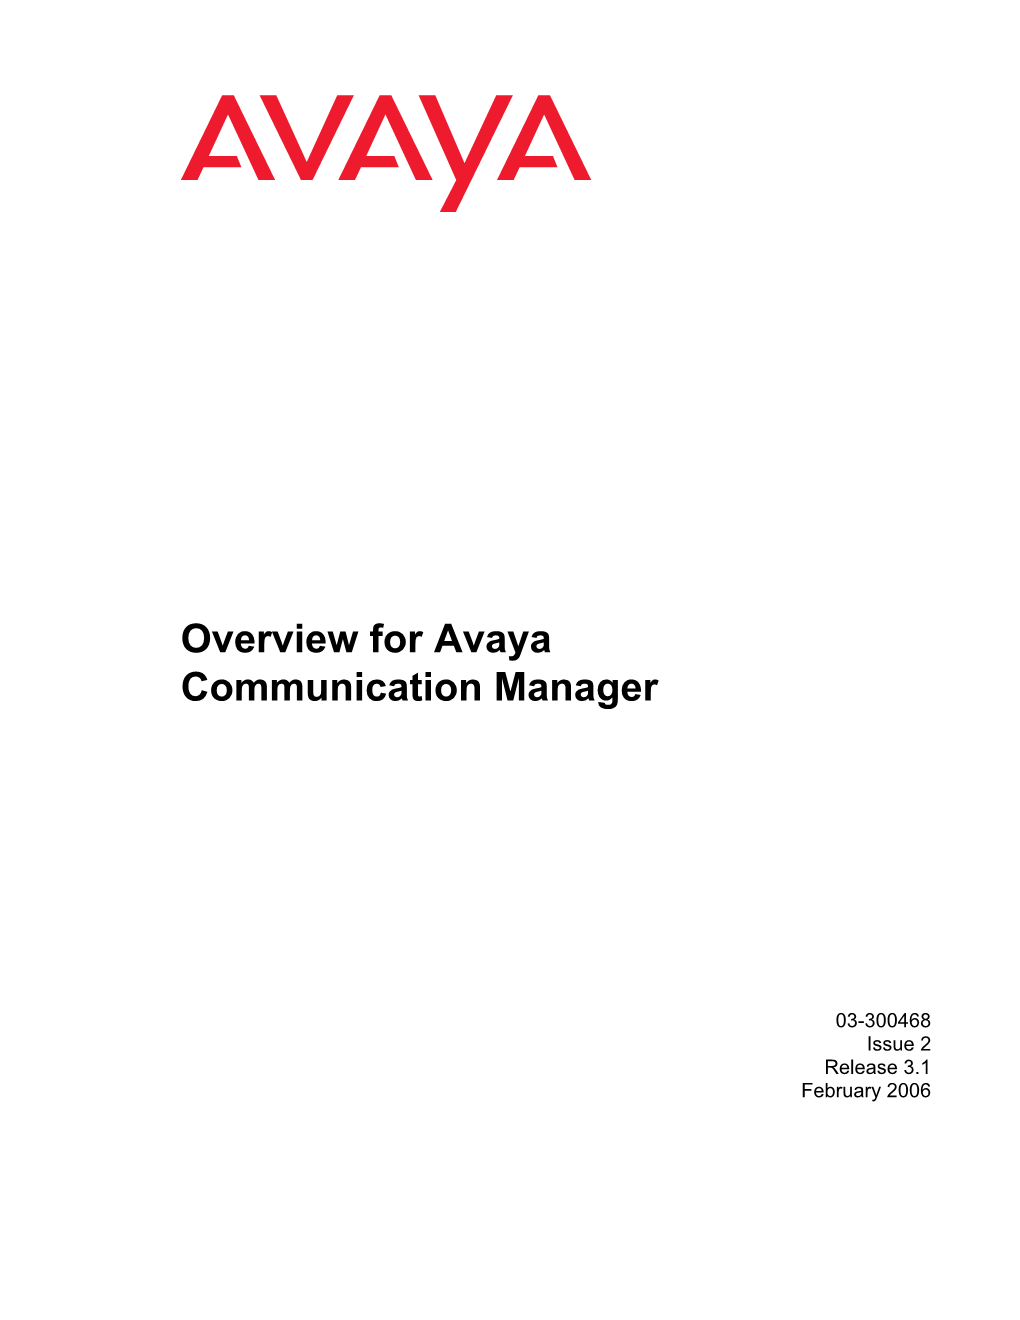 Overview for Avaya Communication Manager